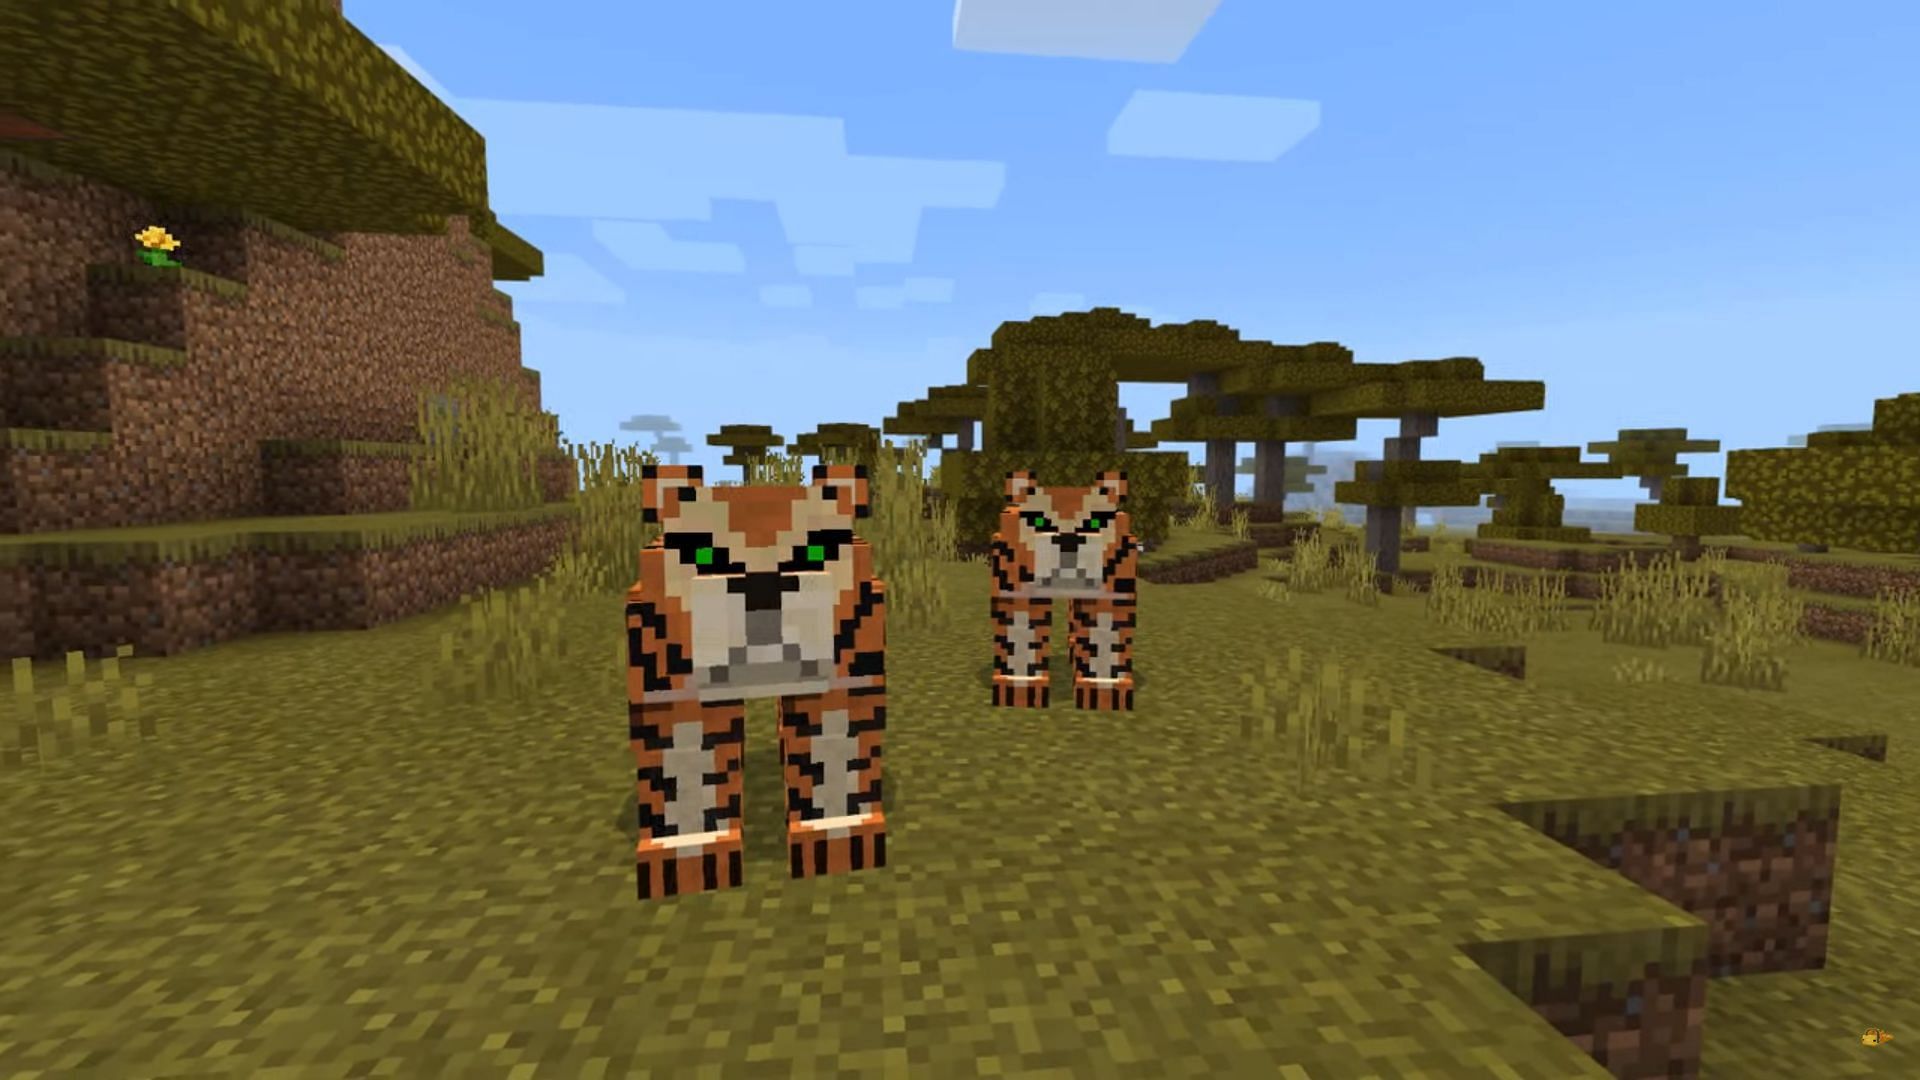 Tigers can be found in the World Animals addon (Image via Minecraft)